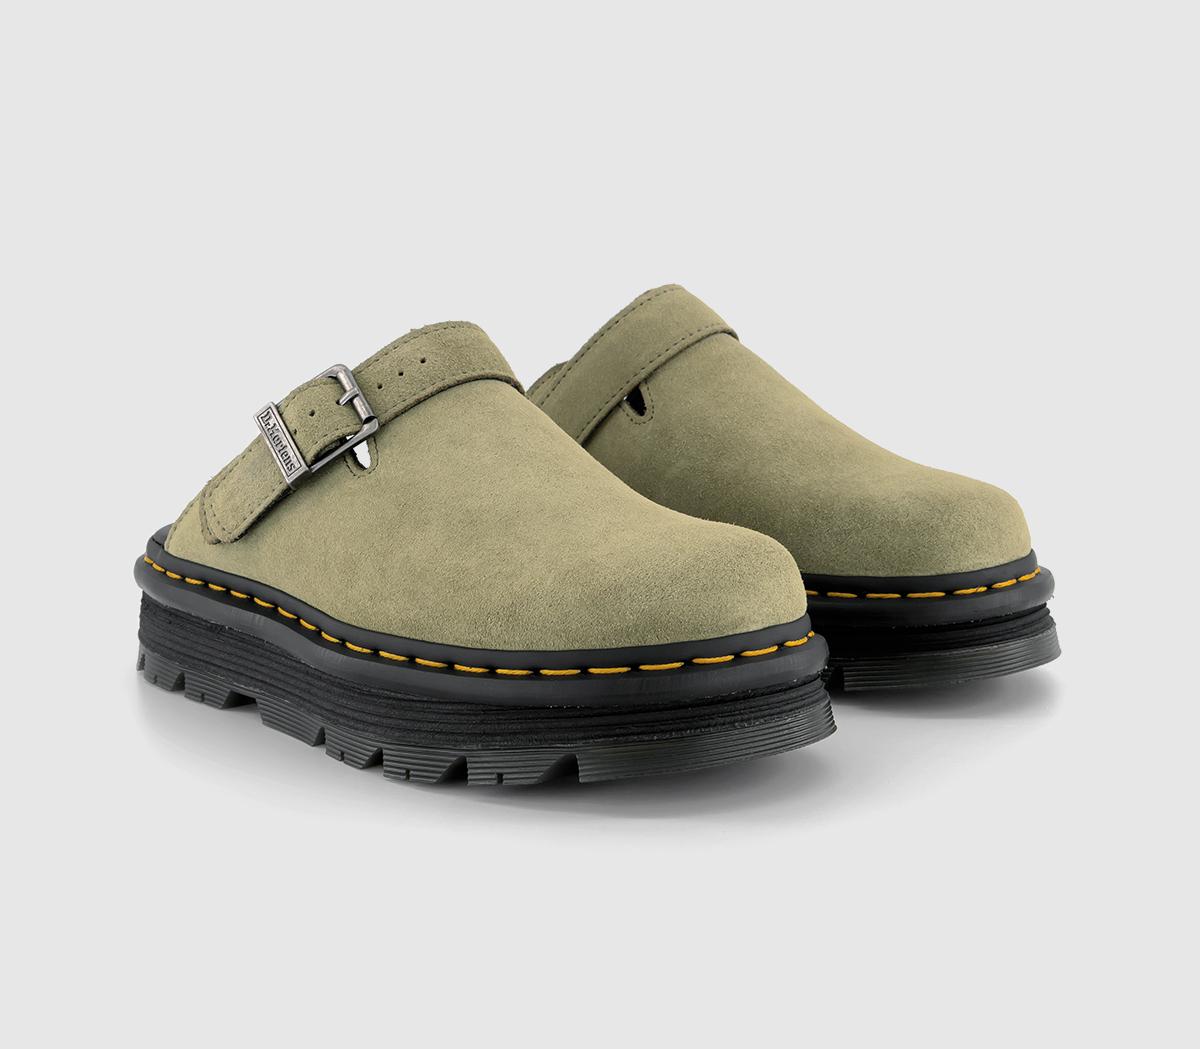 Dr. Martens Womens Zebzag Mule Muted Olive, 5